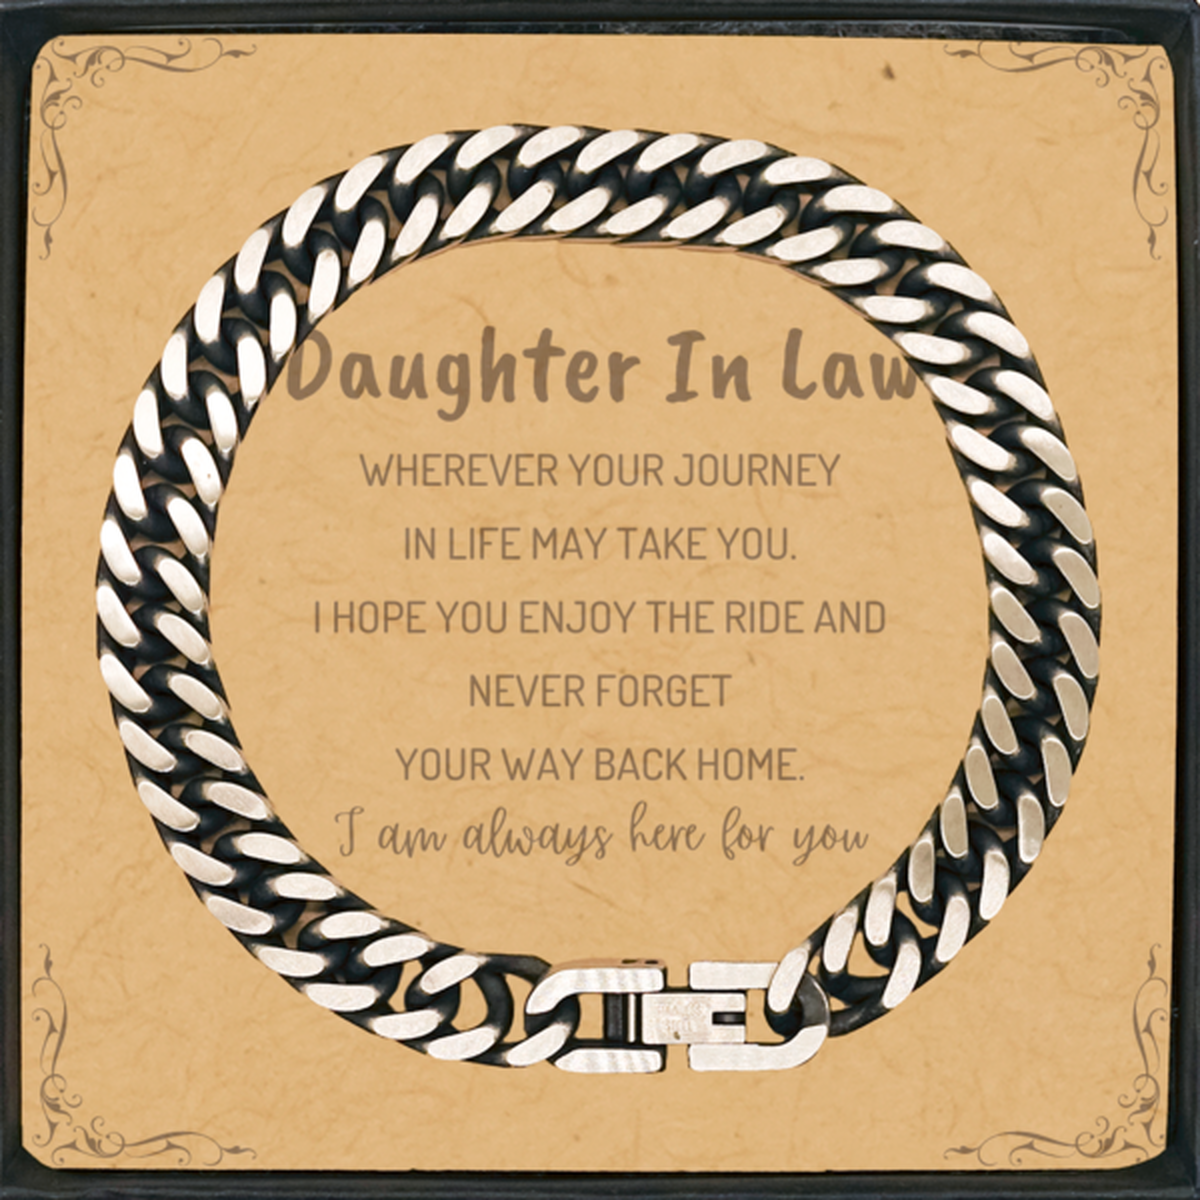 Daughter In Law wherever your journey in life may take you, I am always here for you Daughter In Law Cuban Link Chain Bracelet, Awesome Christmas Gifts For Daughter In Law Message Card, Daughter In Law Birthday Gifts for Men Women Family Loved One